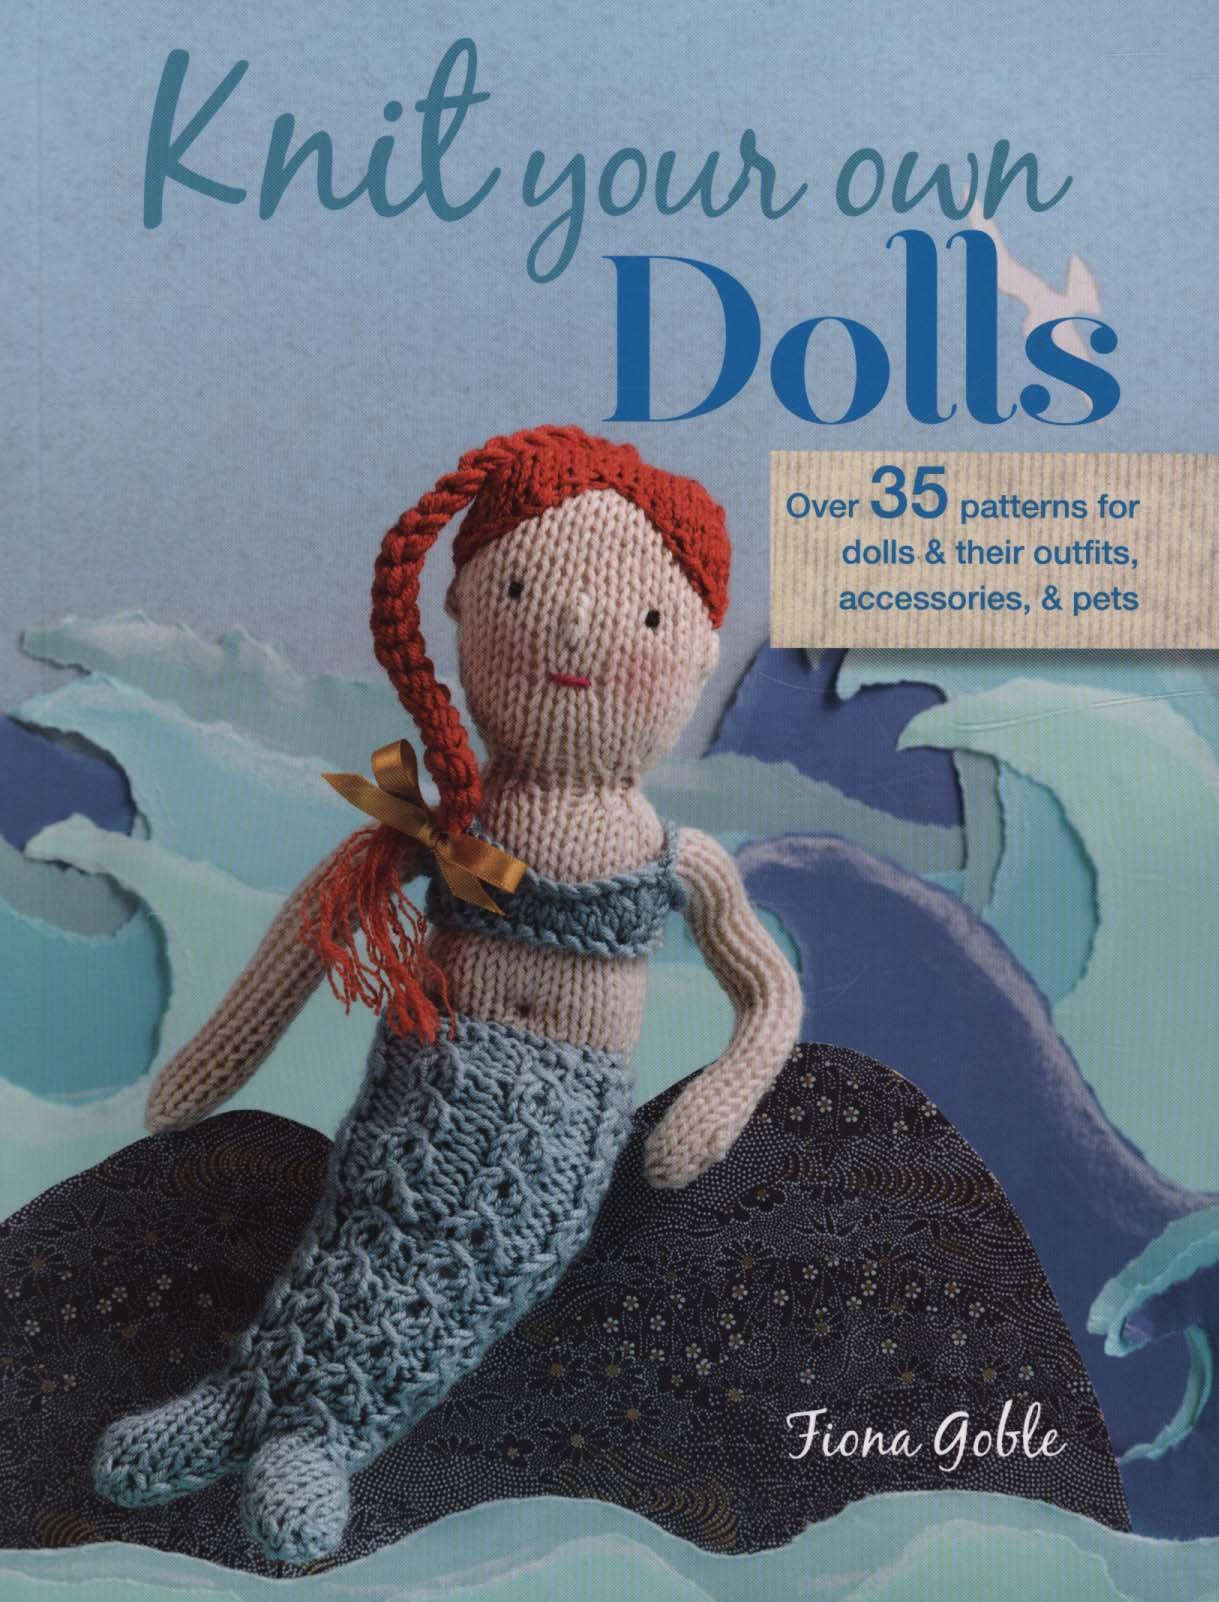 Knit Your Own Dolls